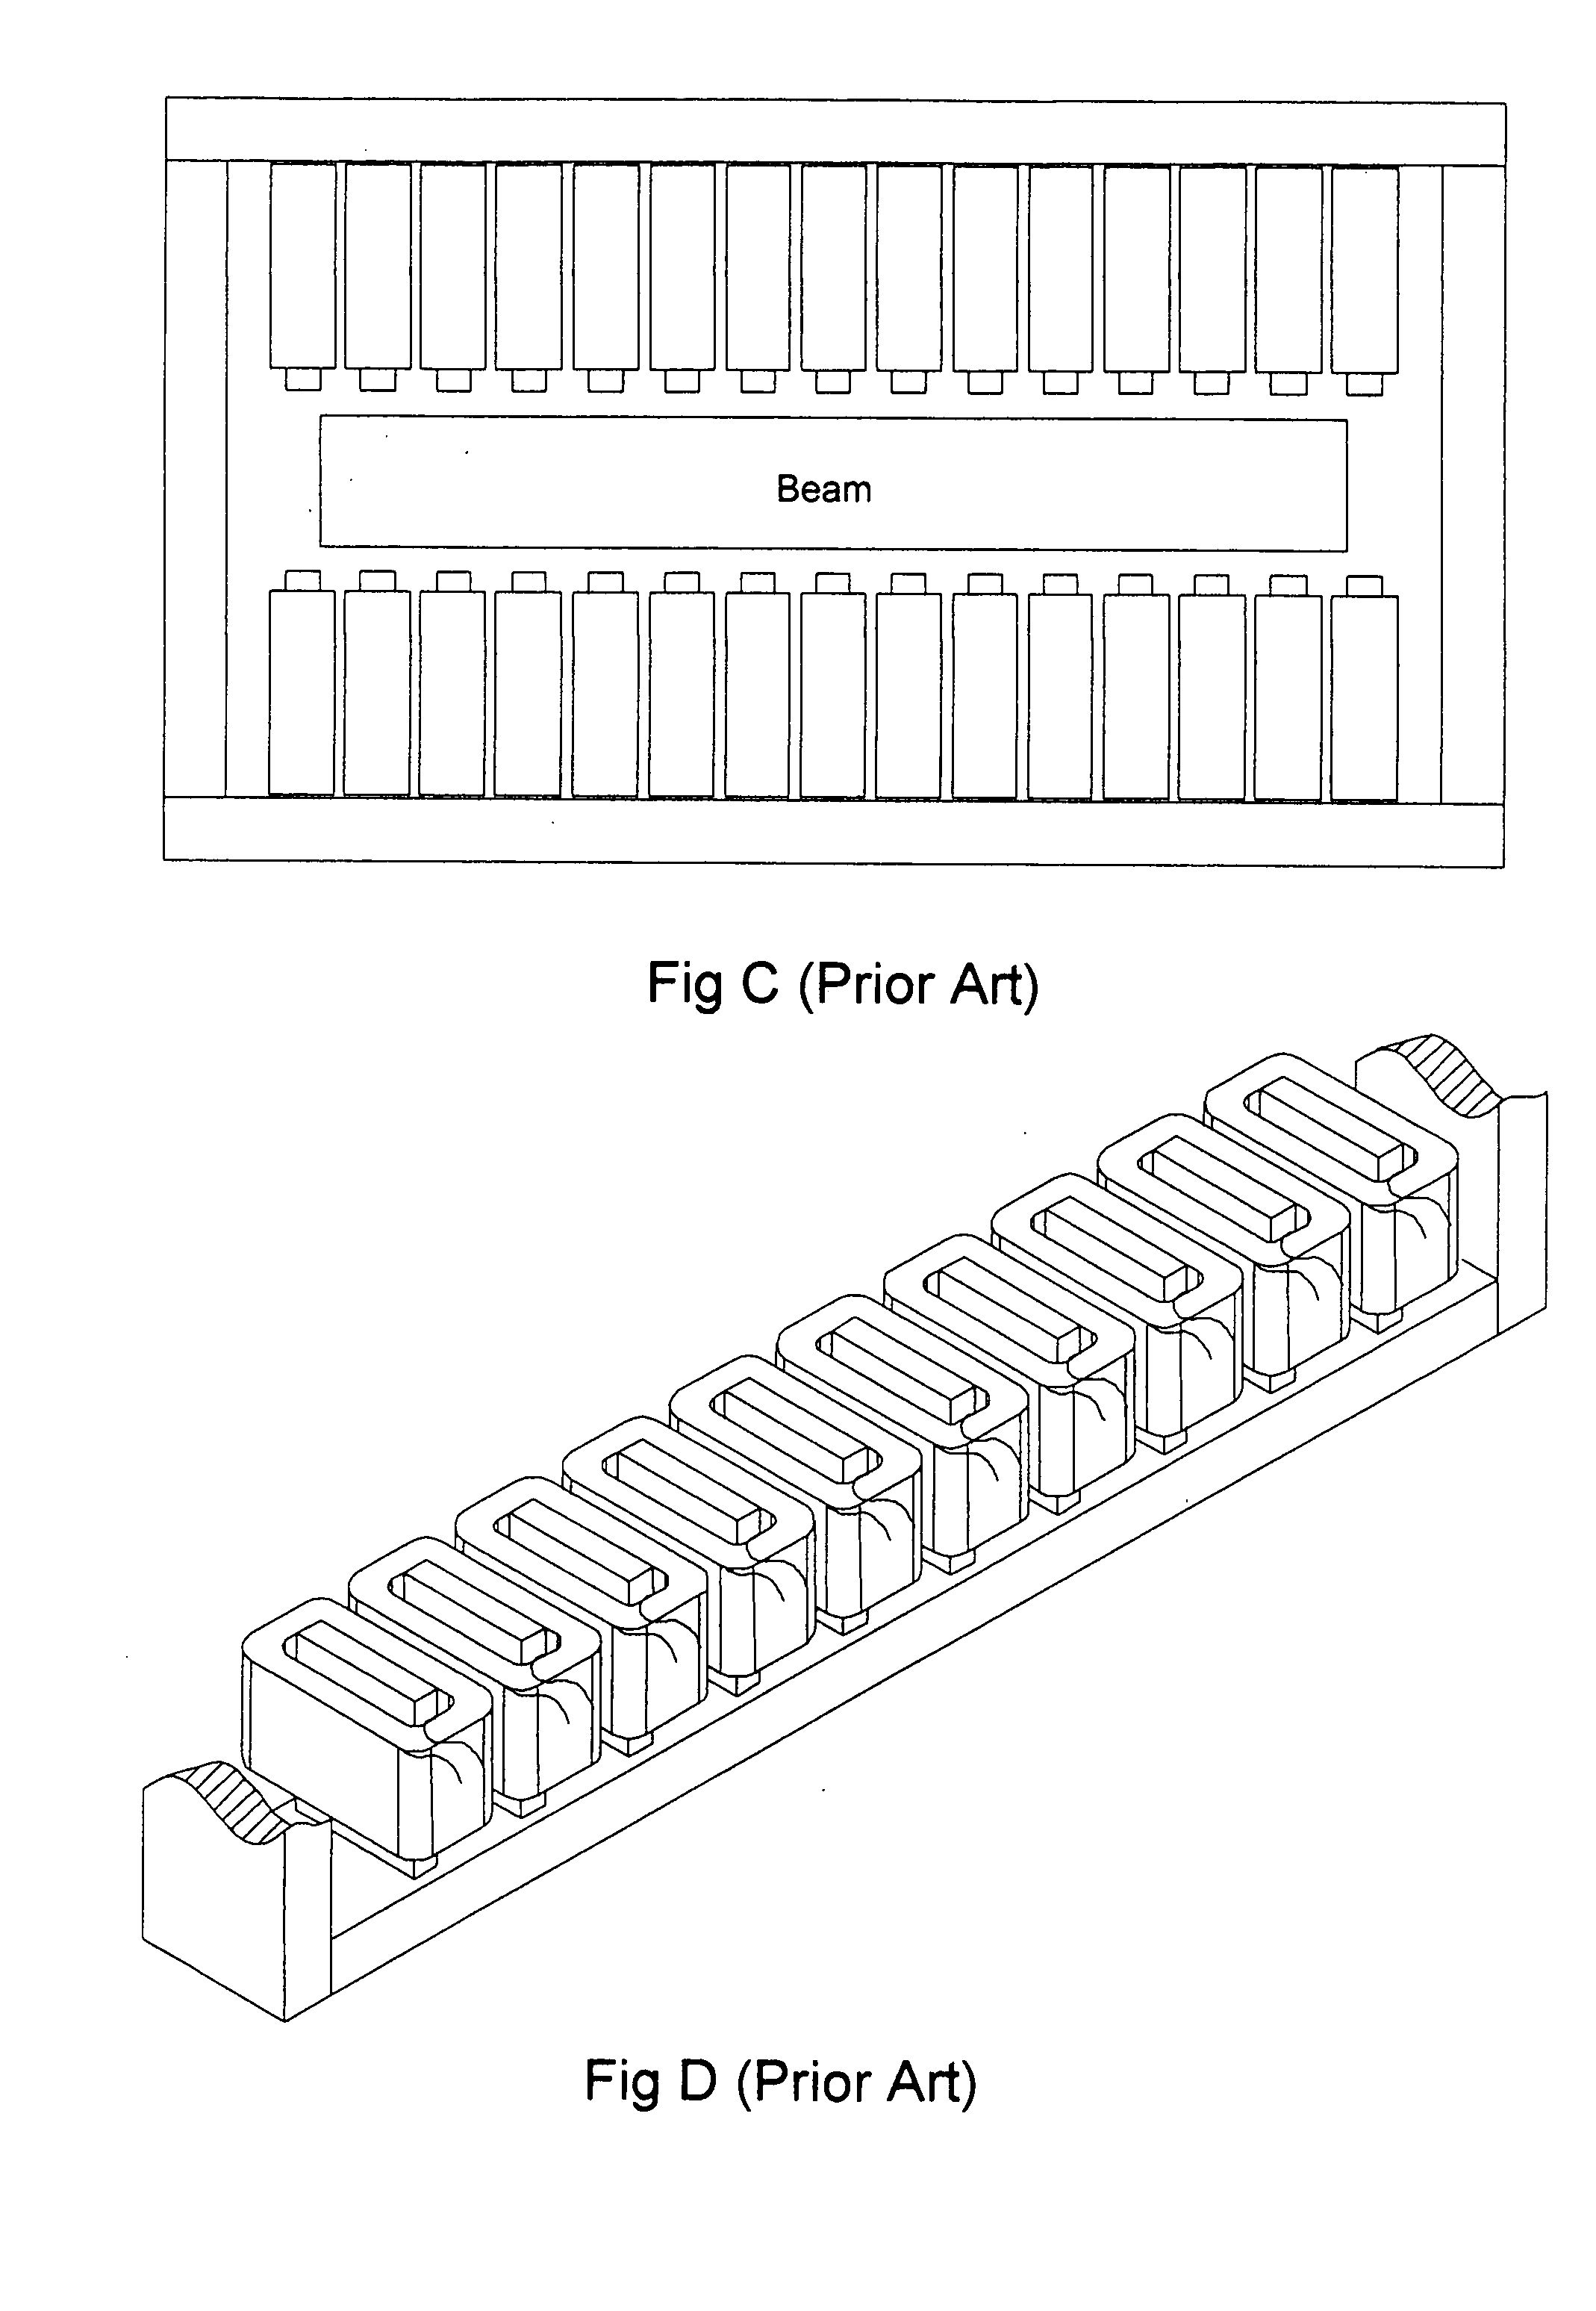 Electromagnetic regulator assembly for adjusting and controlling the current uniformity of continuous ion beams